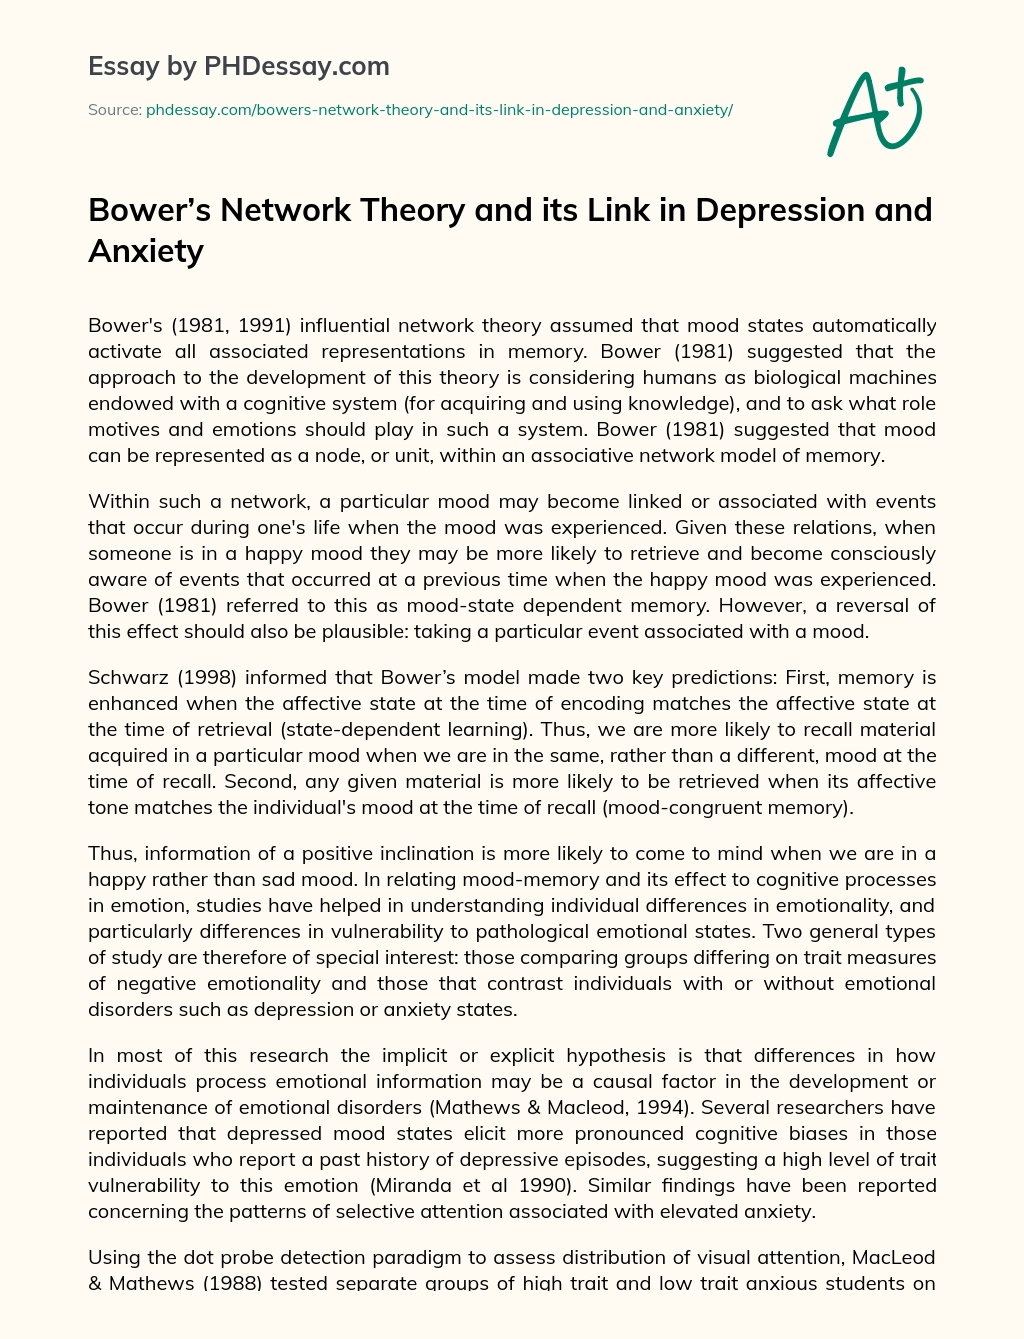 Bower’s Network Theory and its Link in Depression and Anxiety essay